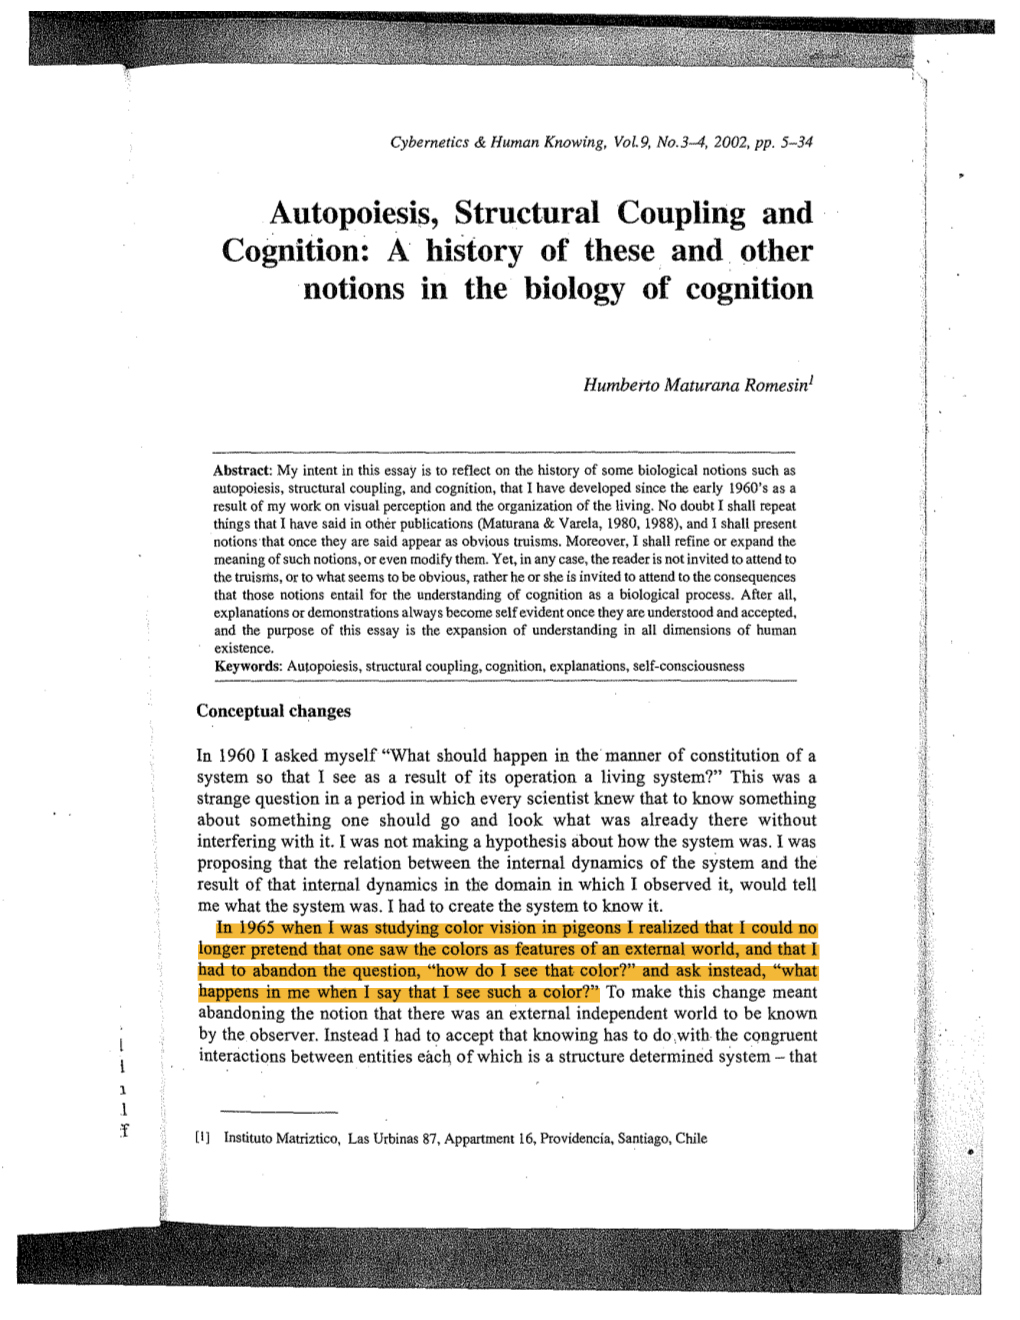 Autopoiesis, Structural Coupling and Cognition: a History of These. And